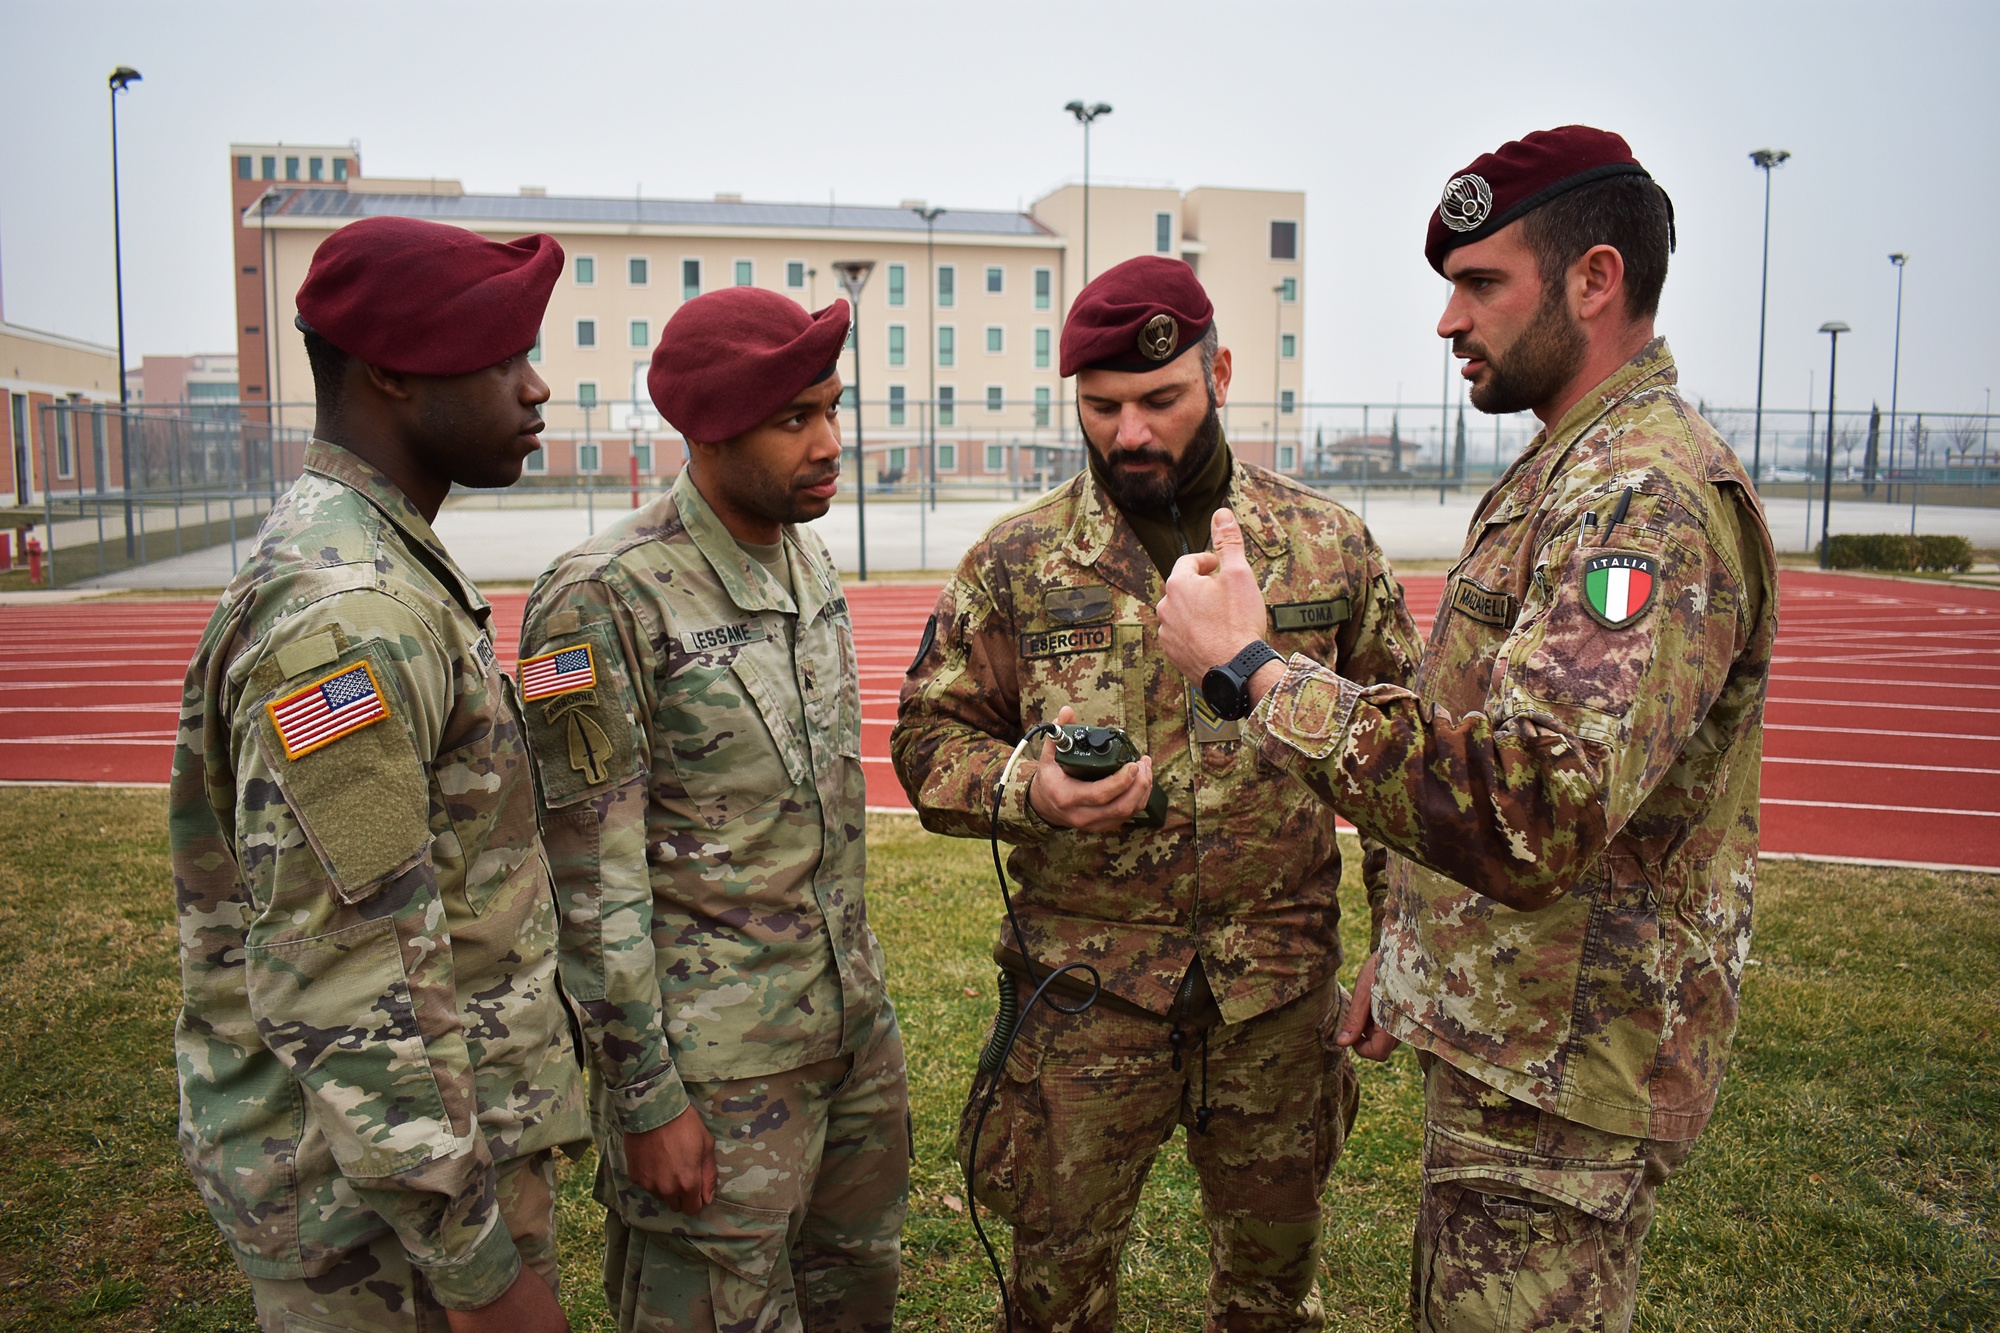 Images - Italians Soldiers along side Sky Soldiers [Image 7 of 14] - DVIDS